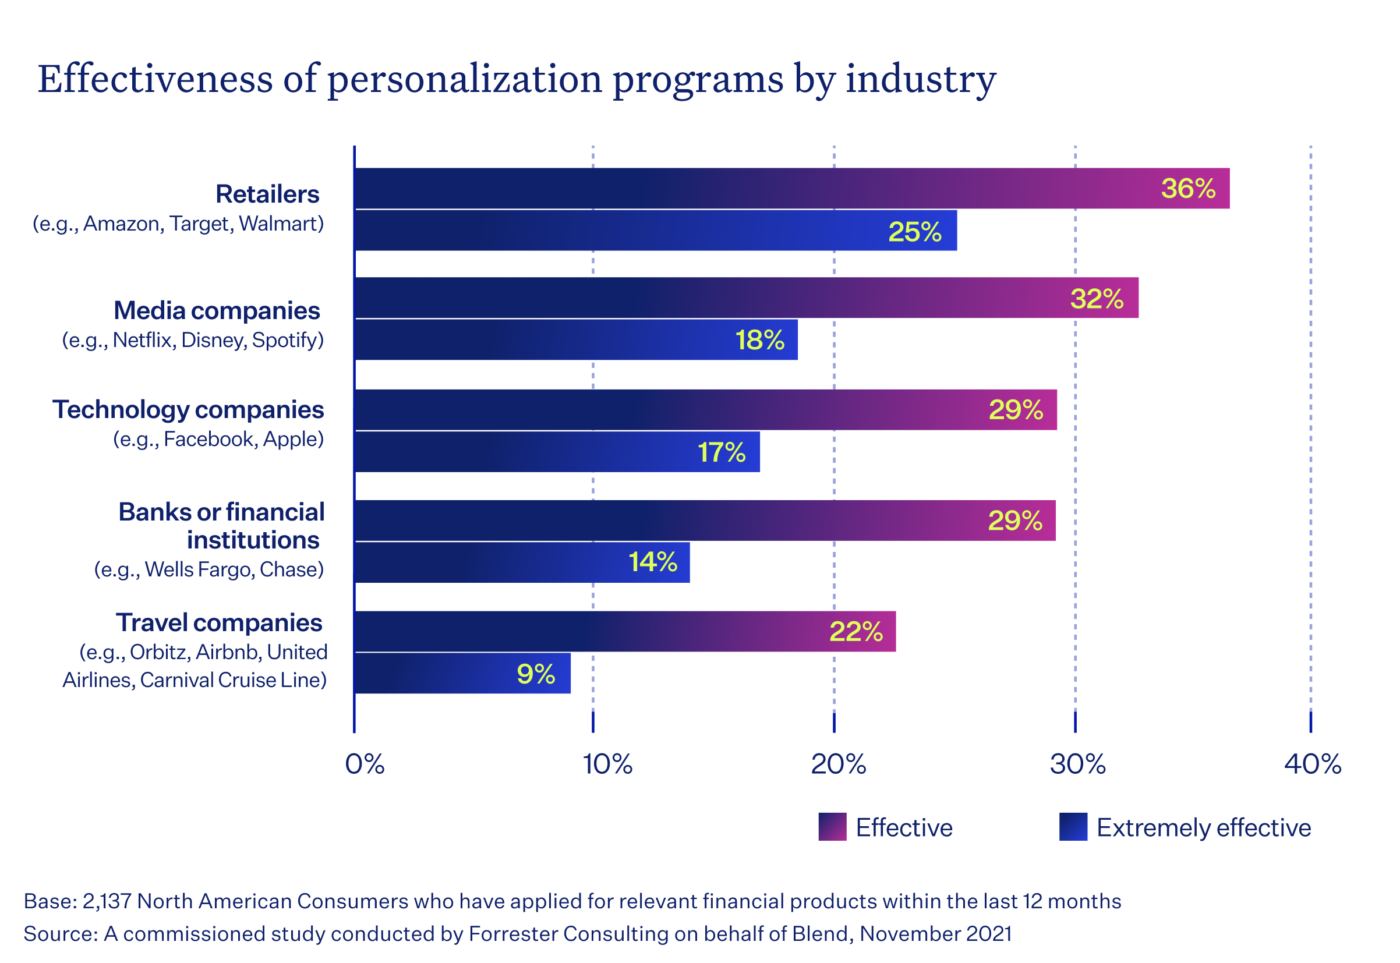 Chart of effectiveness of personalization programs by industry